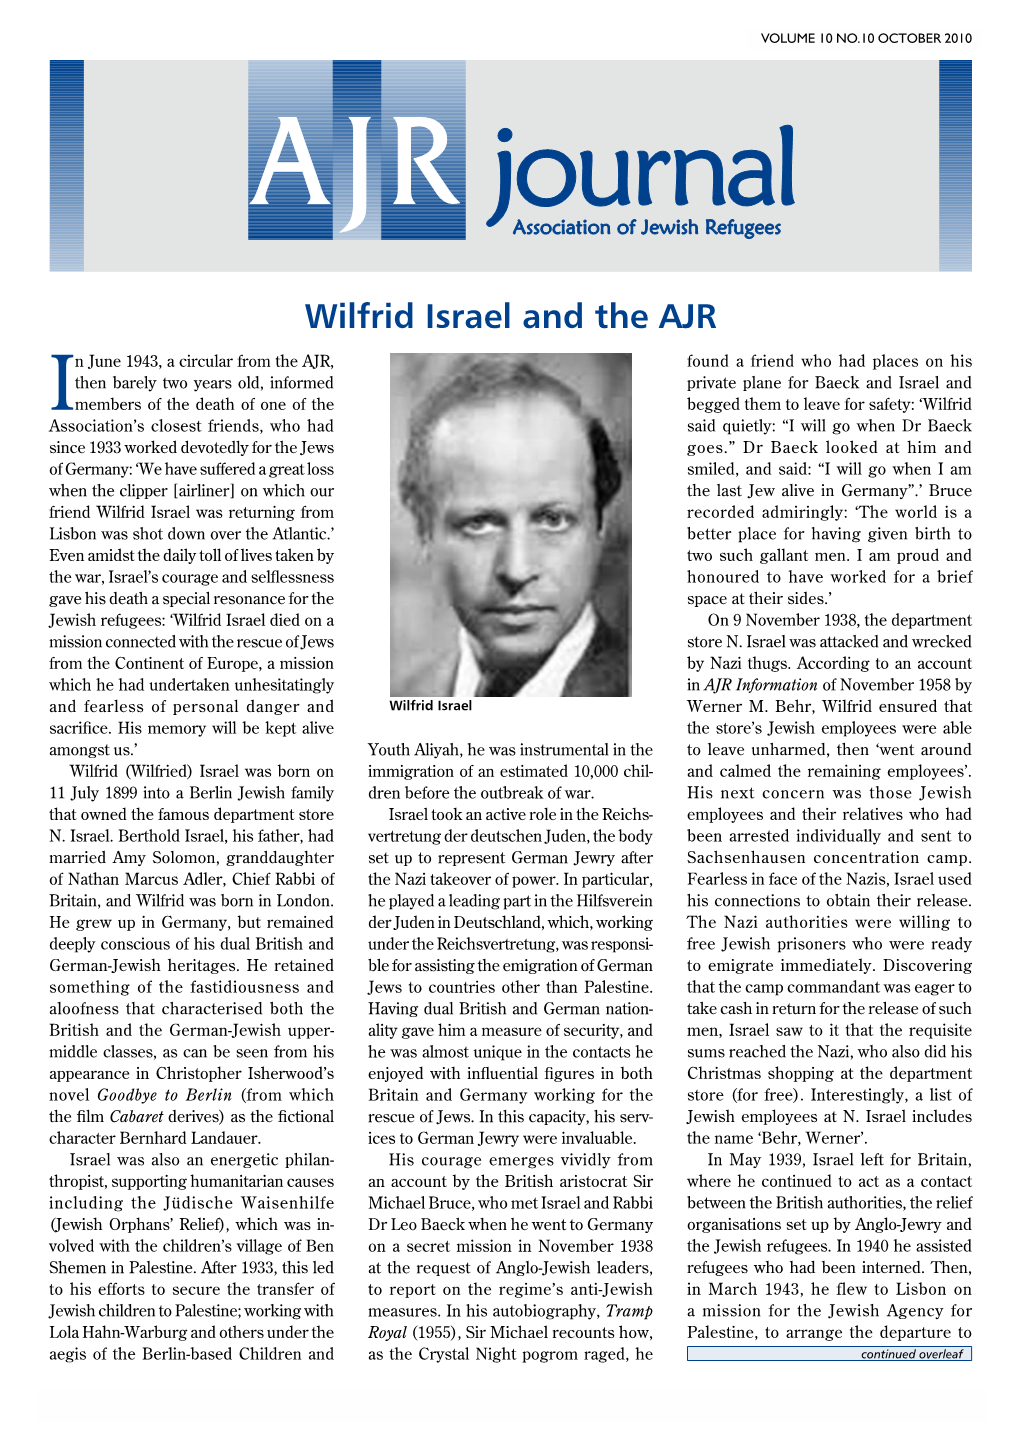 Wilfrid Israel and the AJR